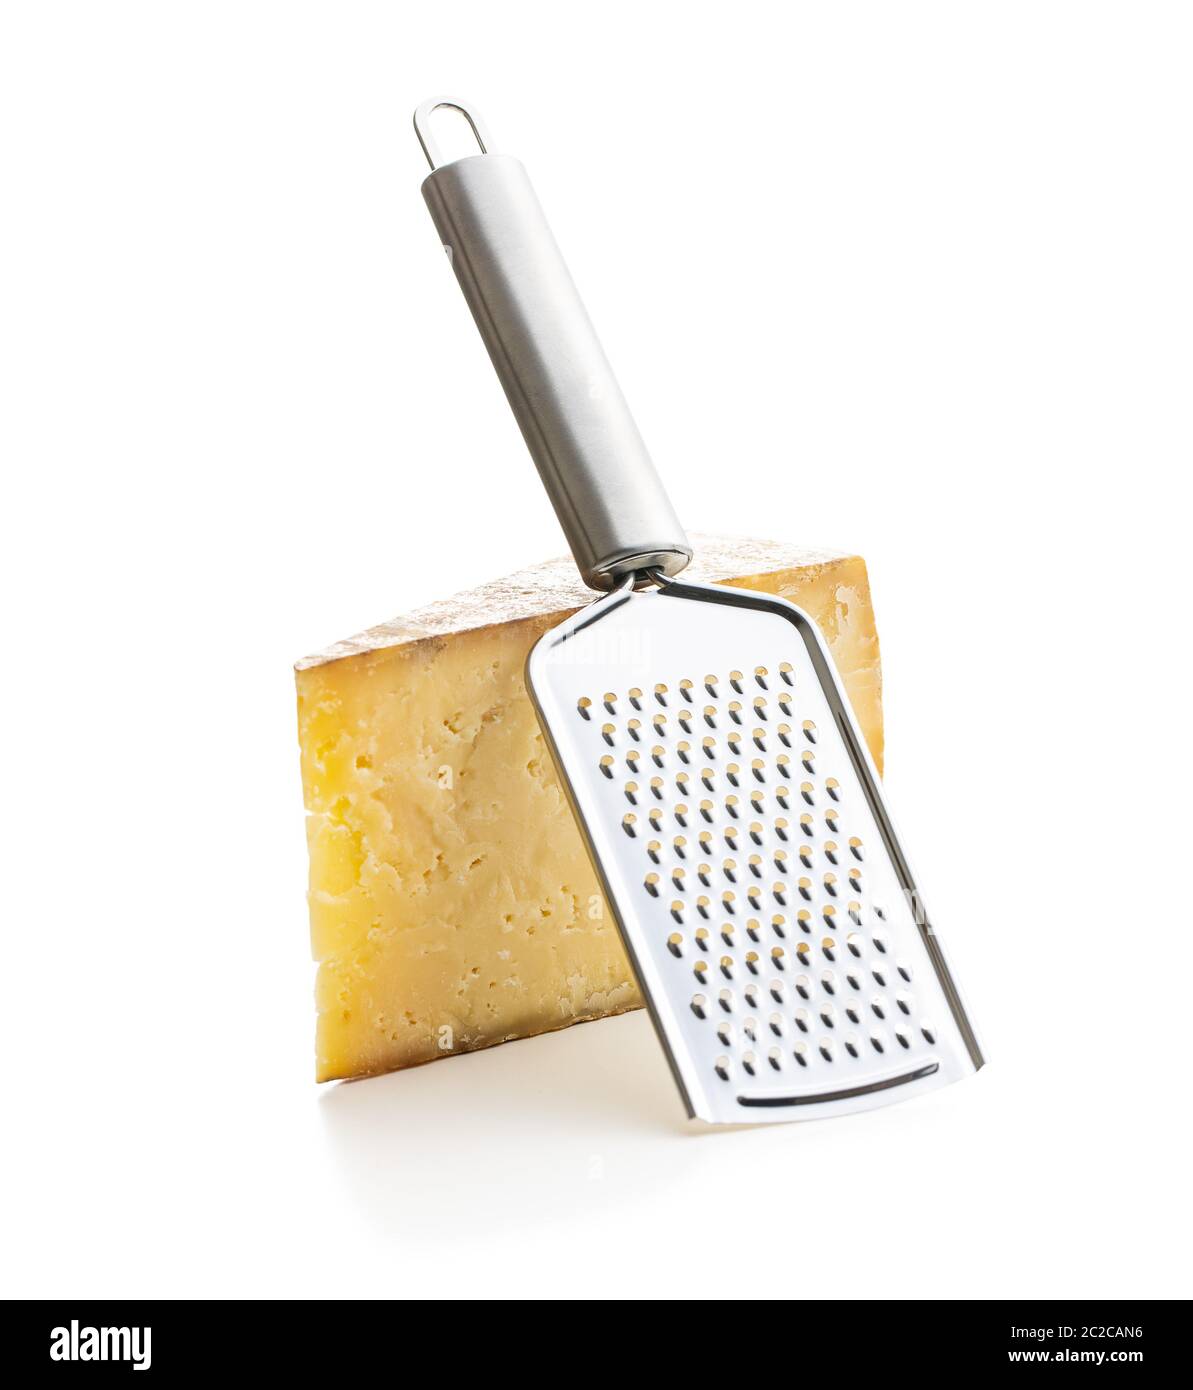 https://c8.alamy.com/comp/2C2CAN6/tasty-cheese-block-and-cheese-grater-isolated-on-white-background-2C2CAN6.jpg